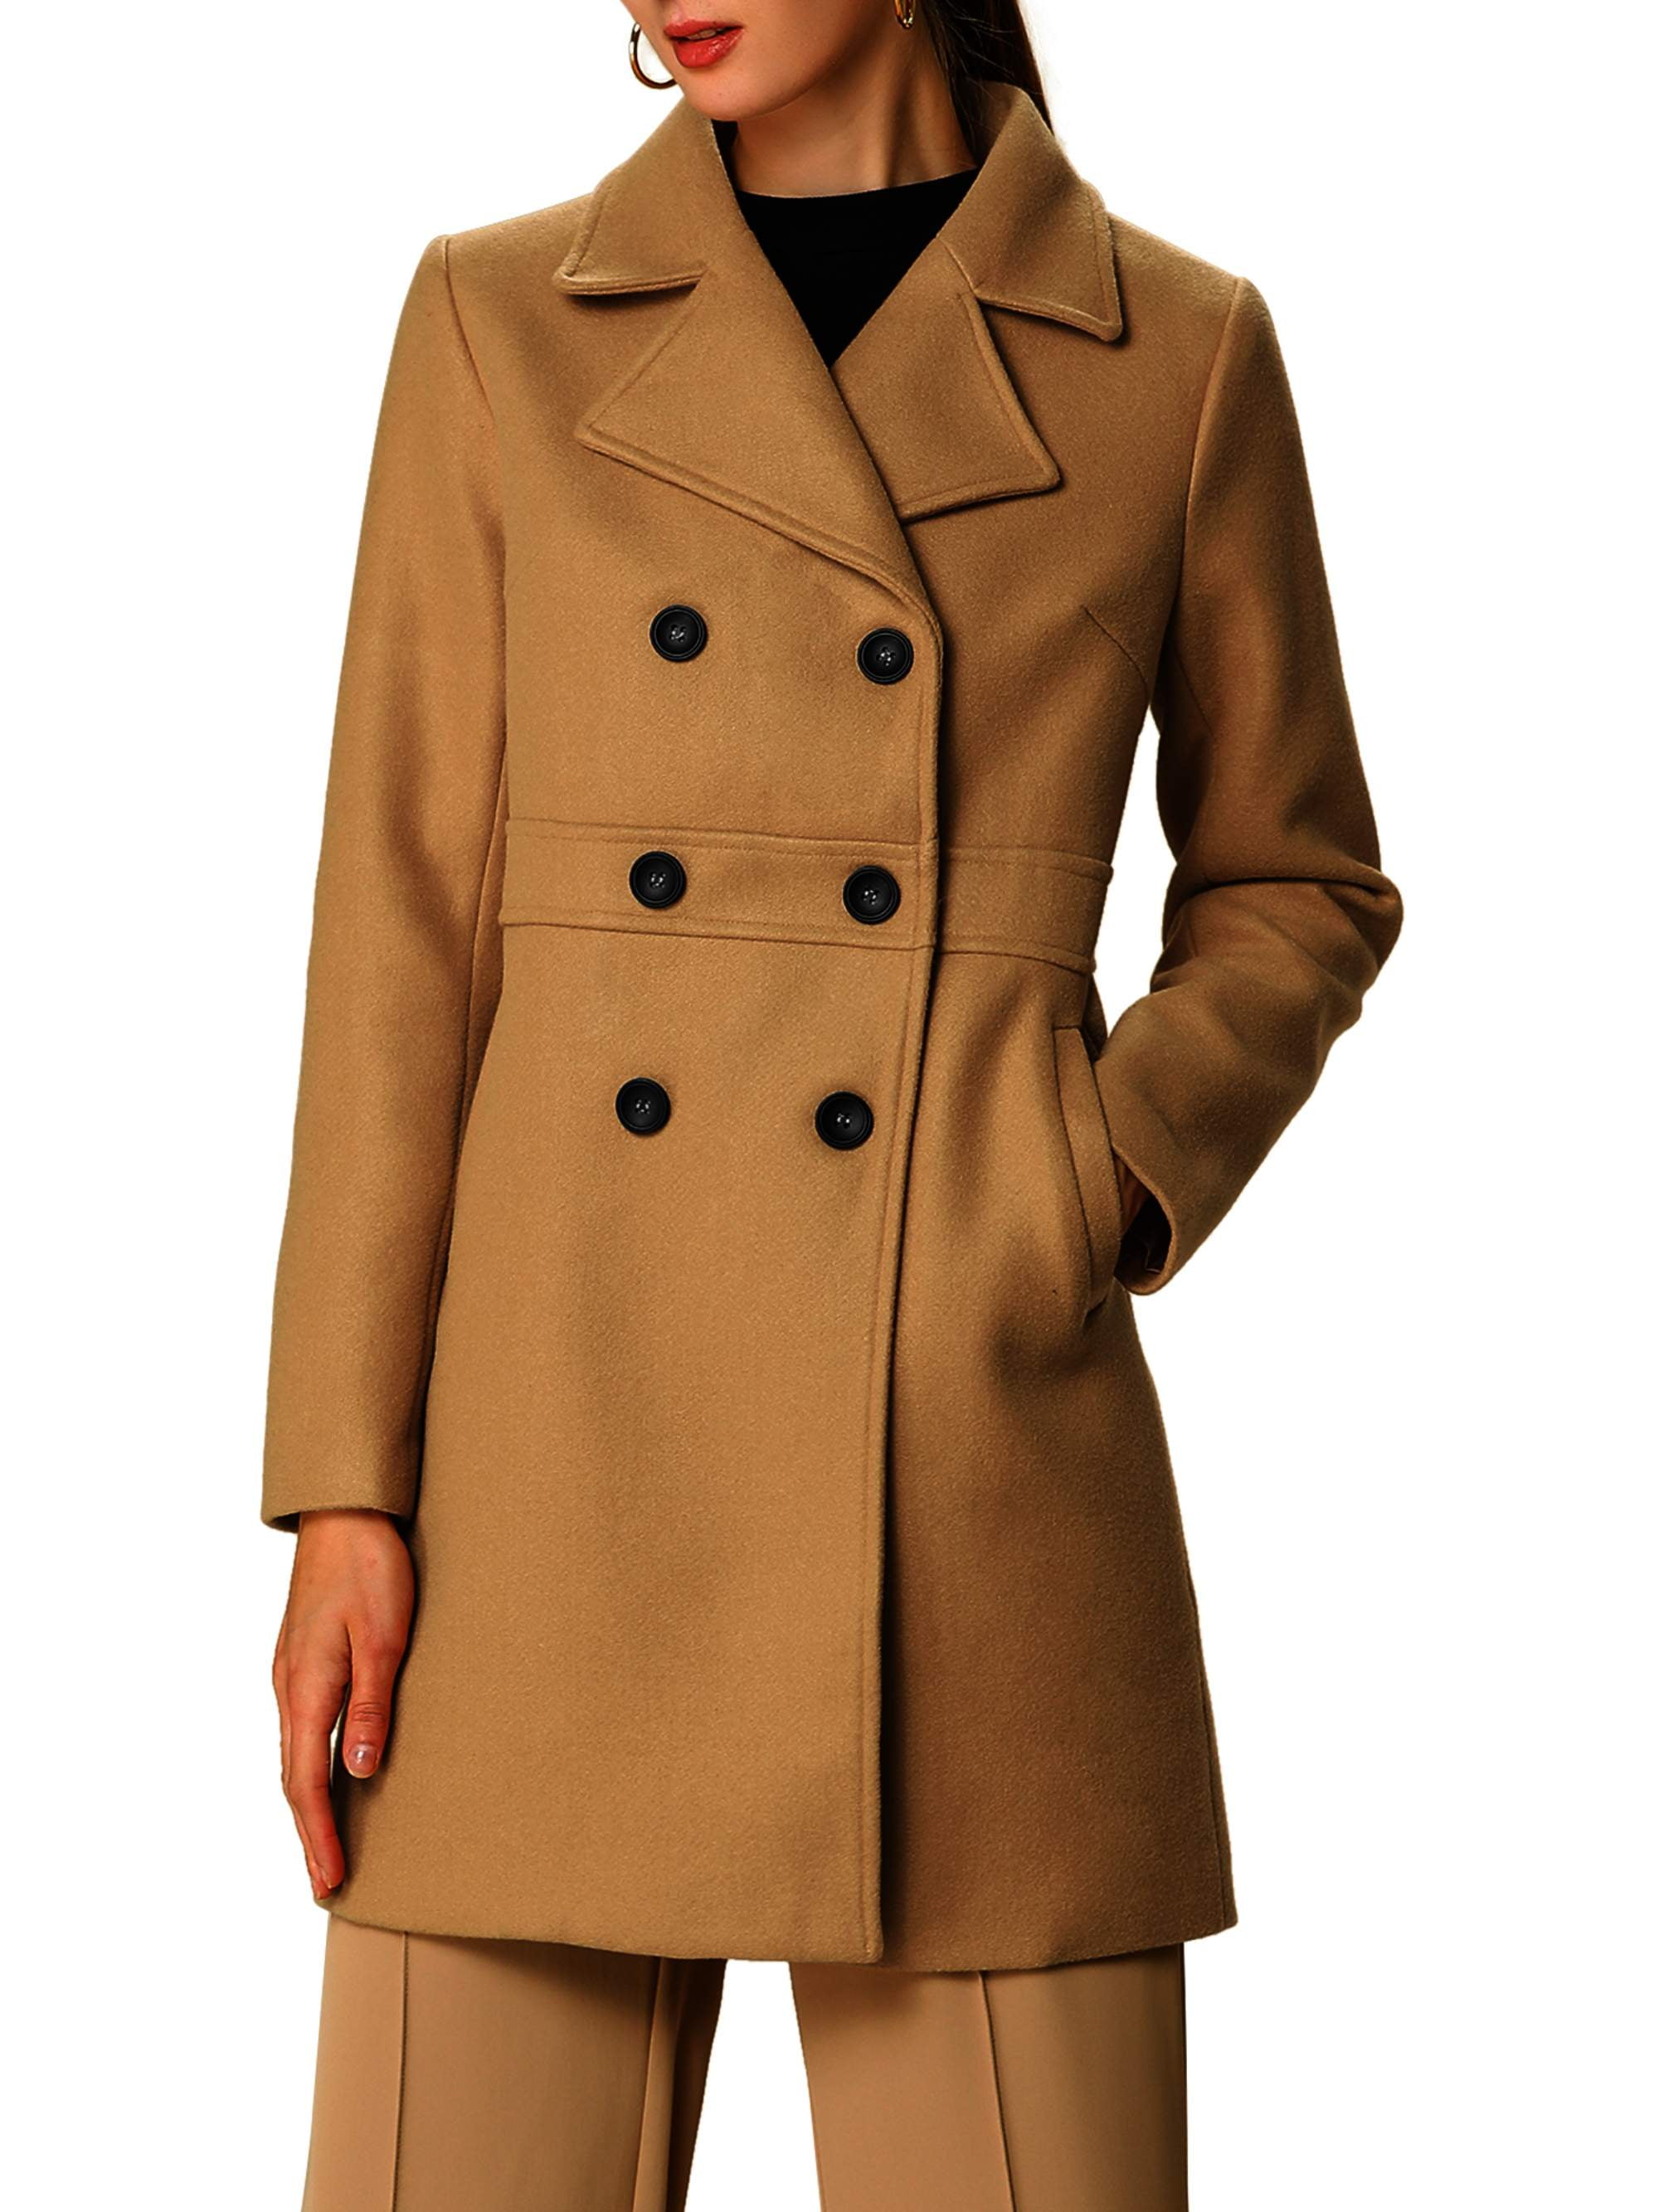 Unique Bargains Women S Notched Lapel Double Breasted Long Trench Winter Coat